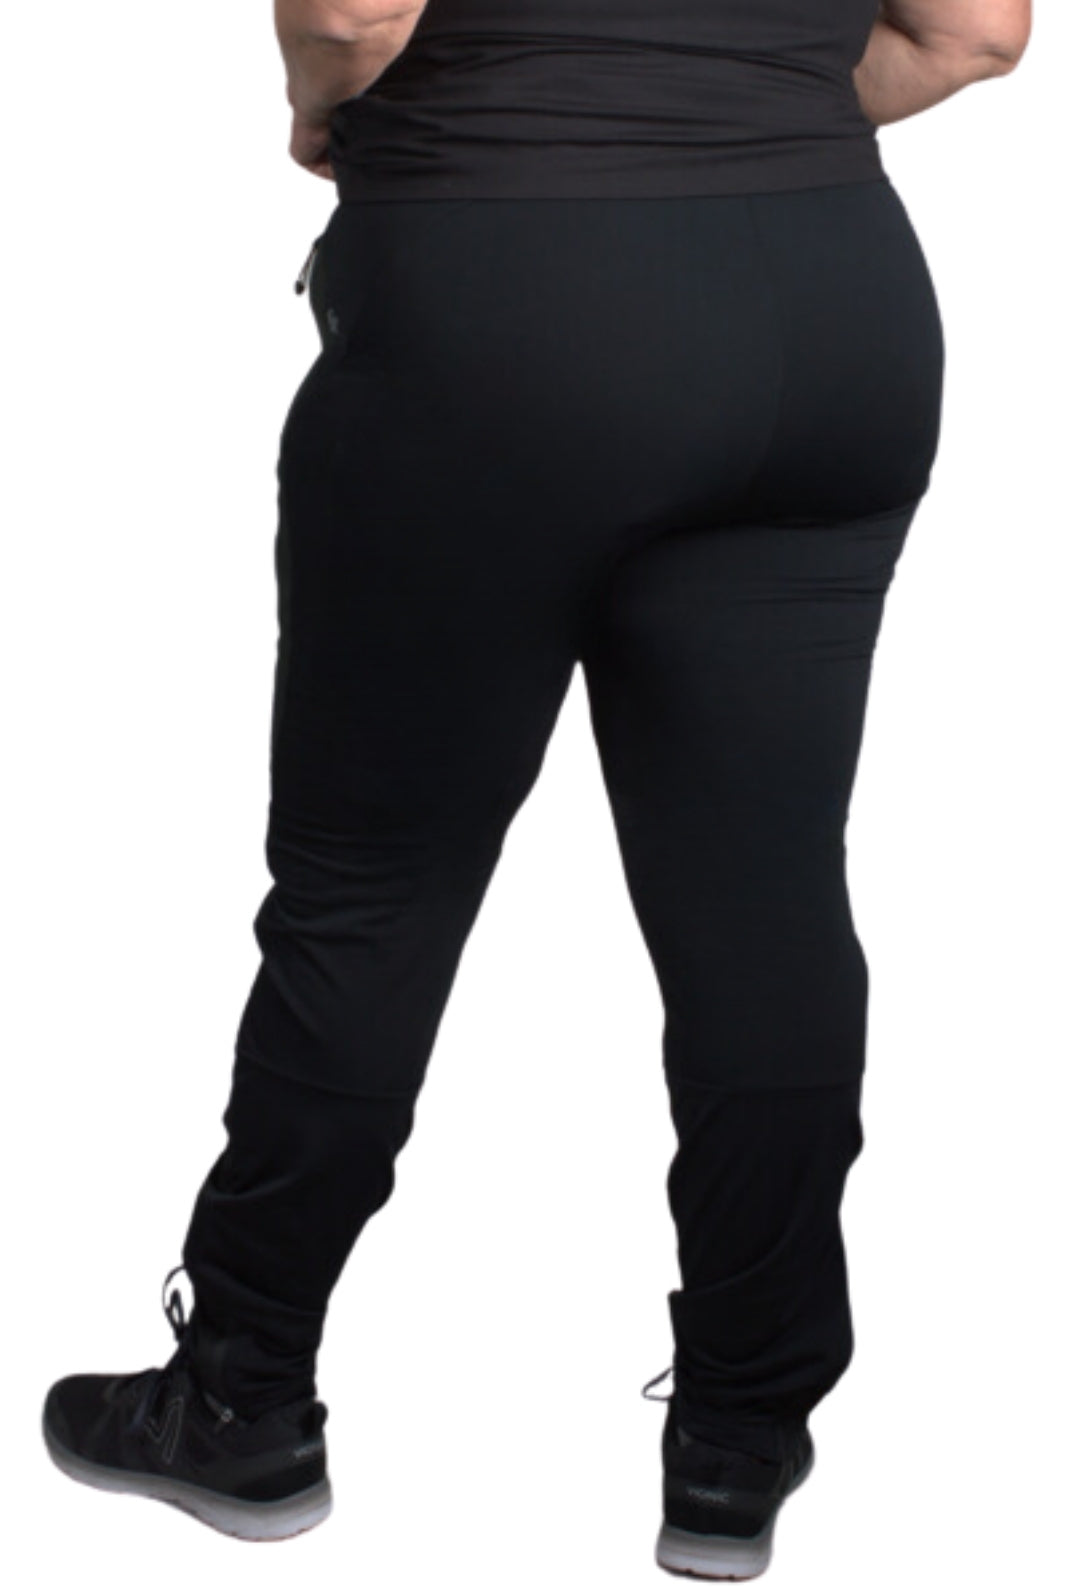 Plus Size Touring Ull Multi-Sport Soft Shell Pants by Sportive Plus